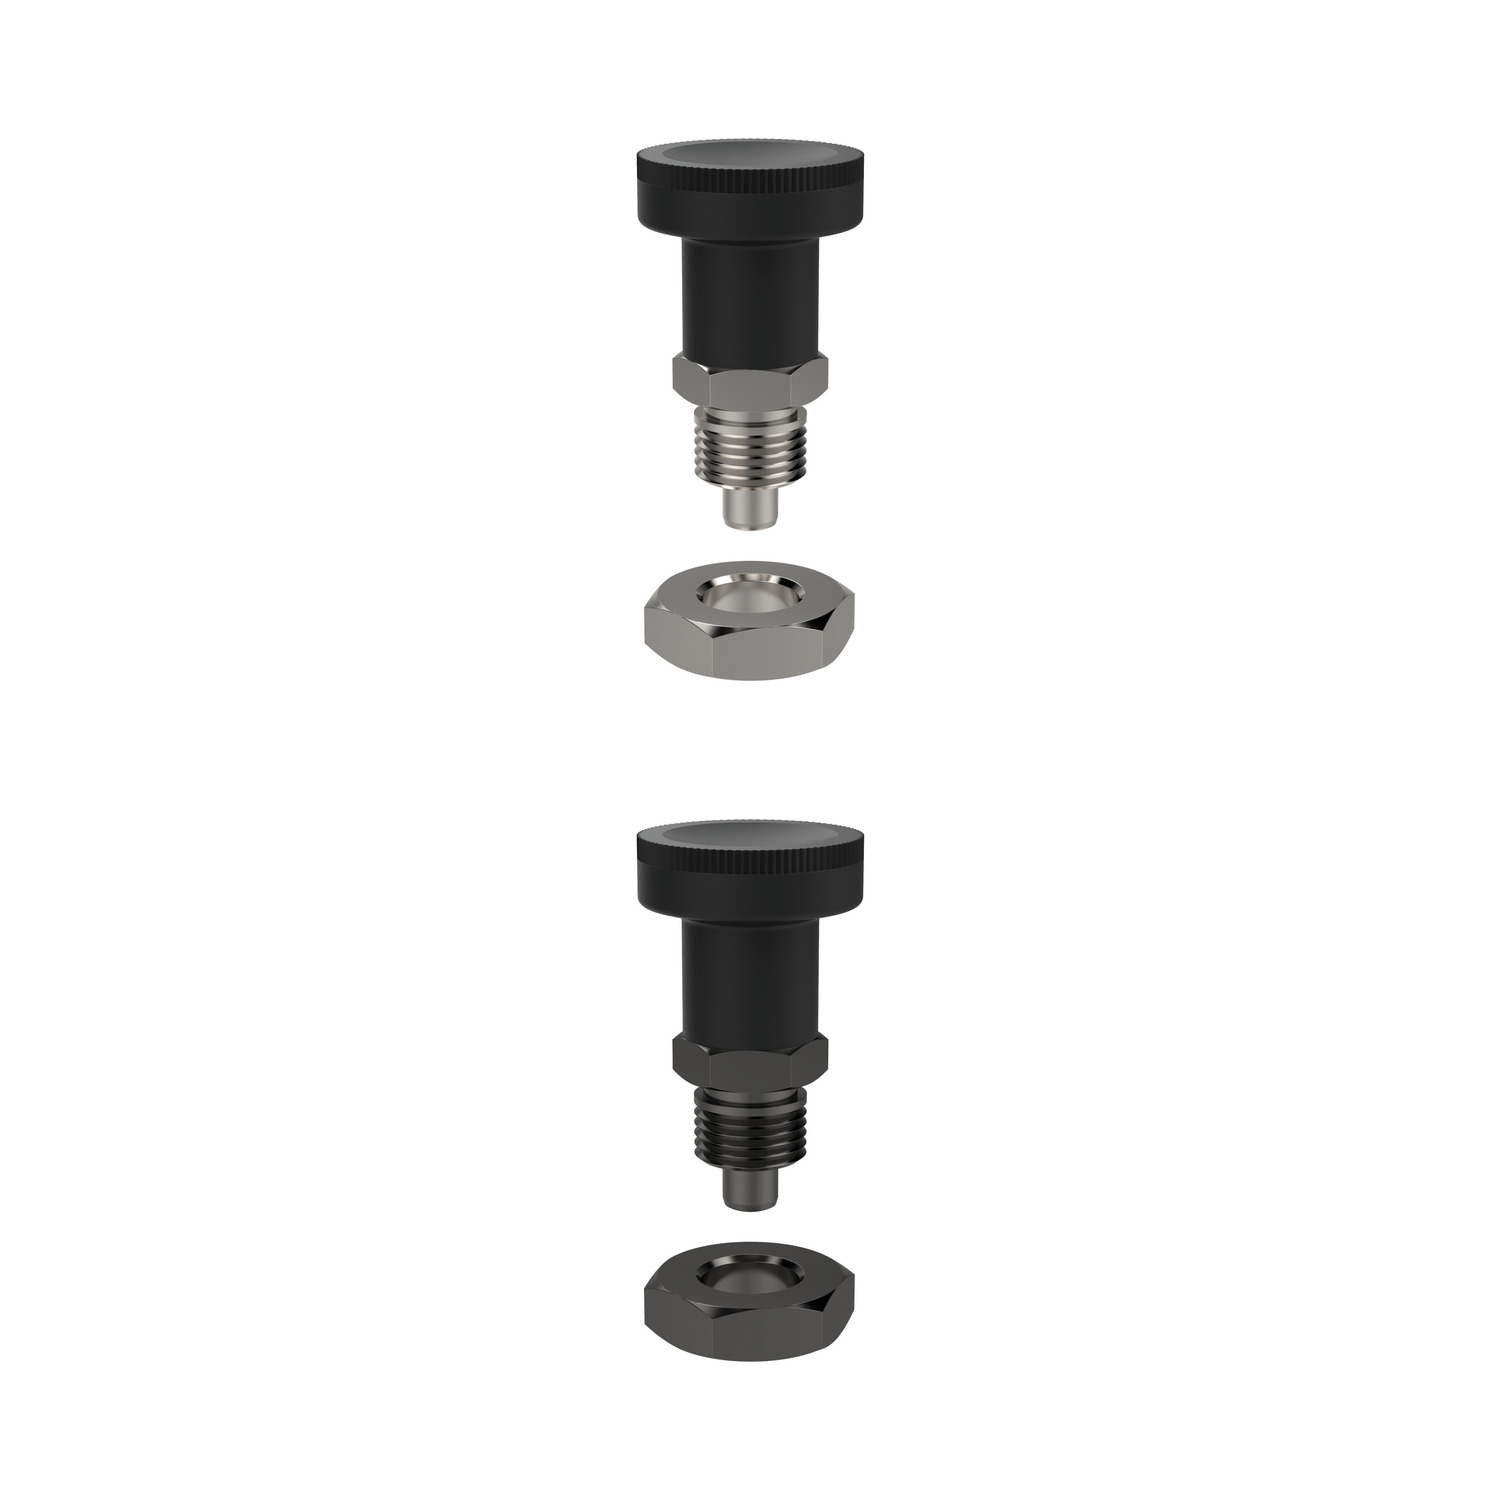 Index Plungers - Pull Grip Pull grip index plunger for thin walled parts. Locking and non-locking type available.